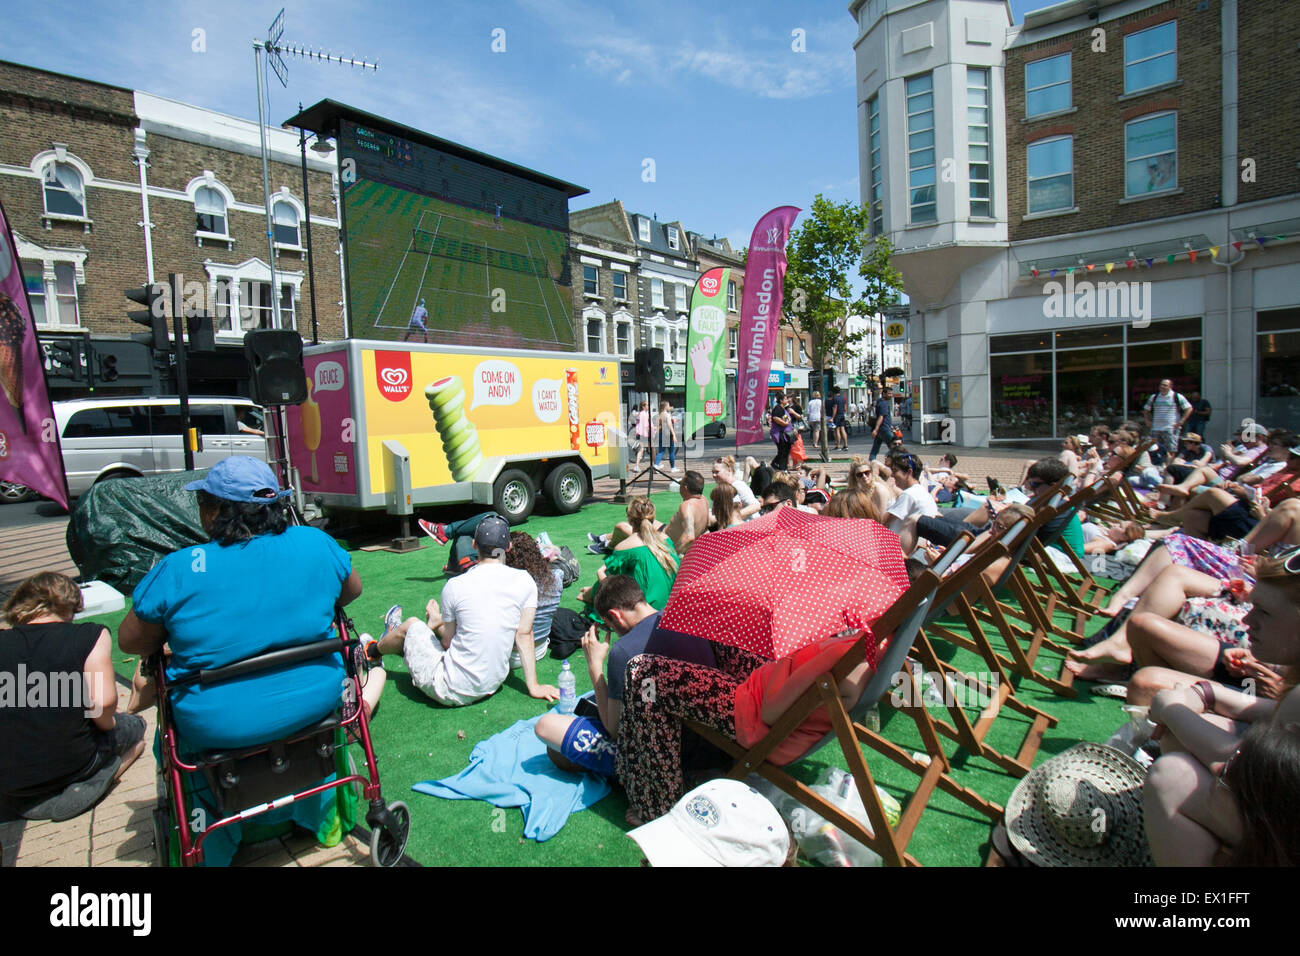 Wimbledon, London, UK. 04th July, 2015. People watch a live tennis match between Roger Federer and Sam Groth on big screens in Wimbledon town centre Credit:  amer ghazzal/Alamy Live News Stock Photo